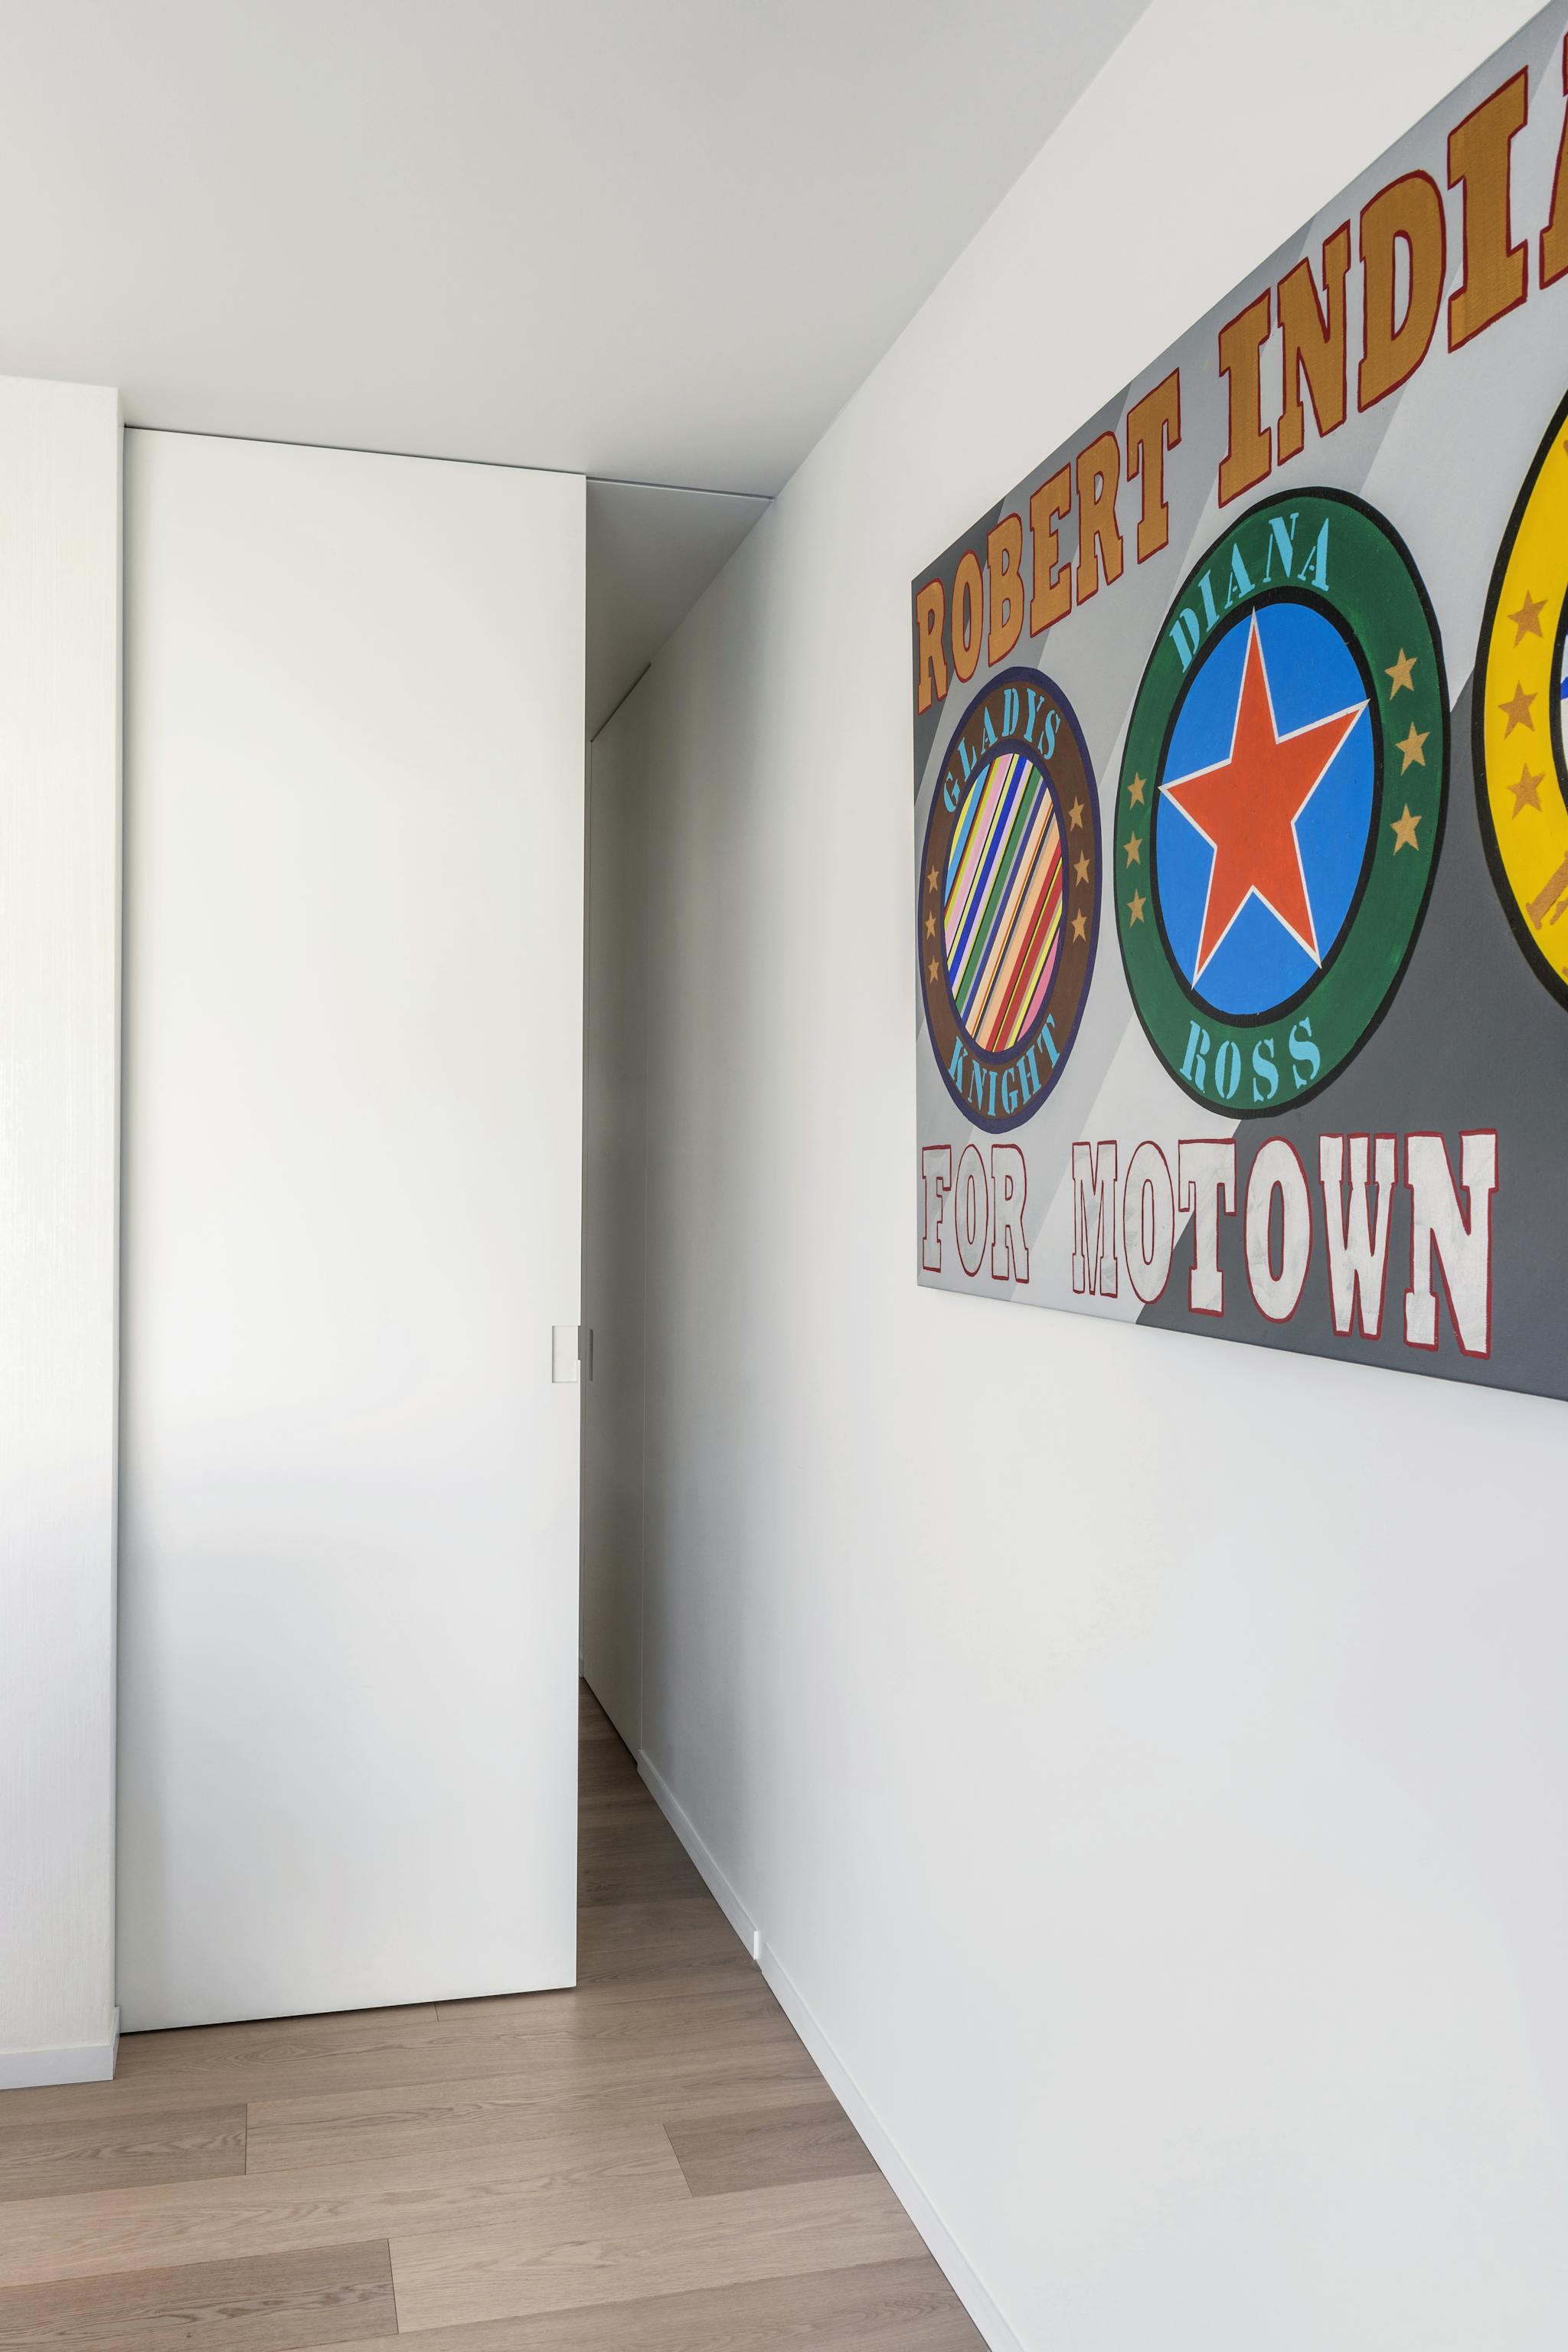 A white interior with a large motown poster and a white single sliding pocket door that is partially open.